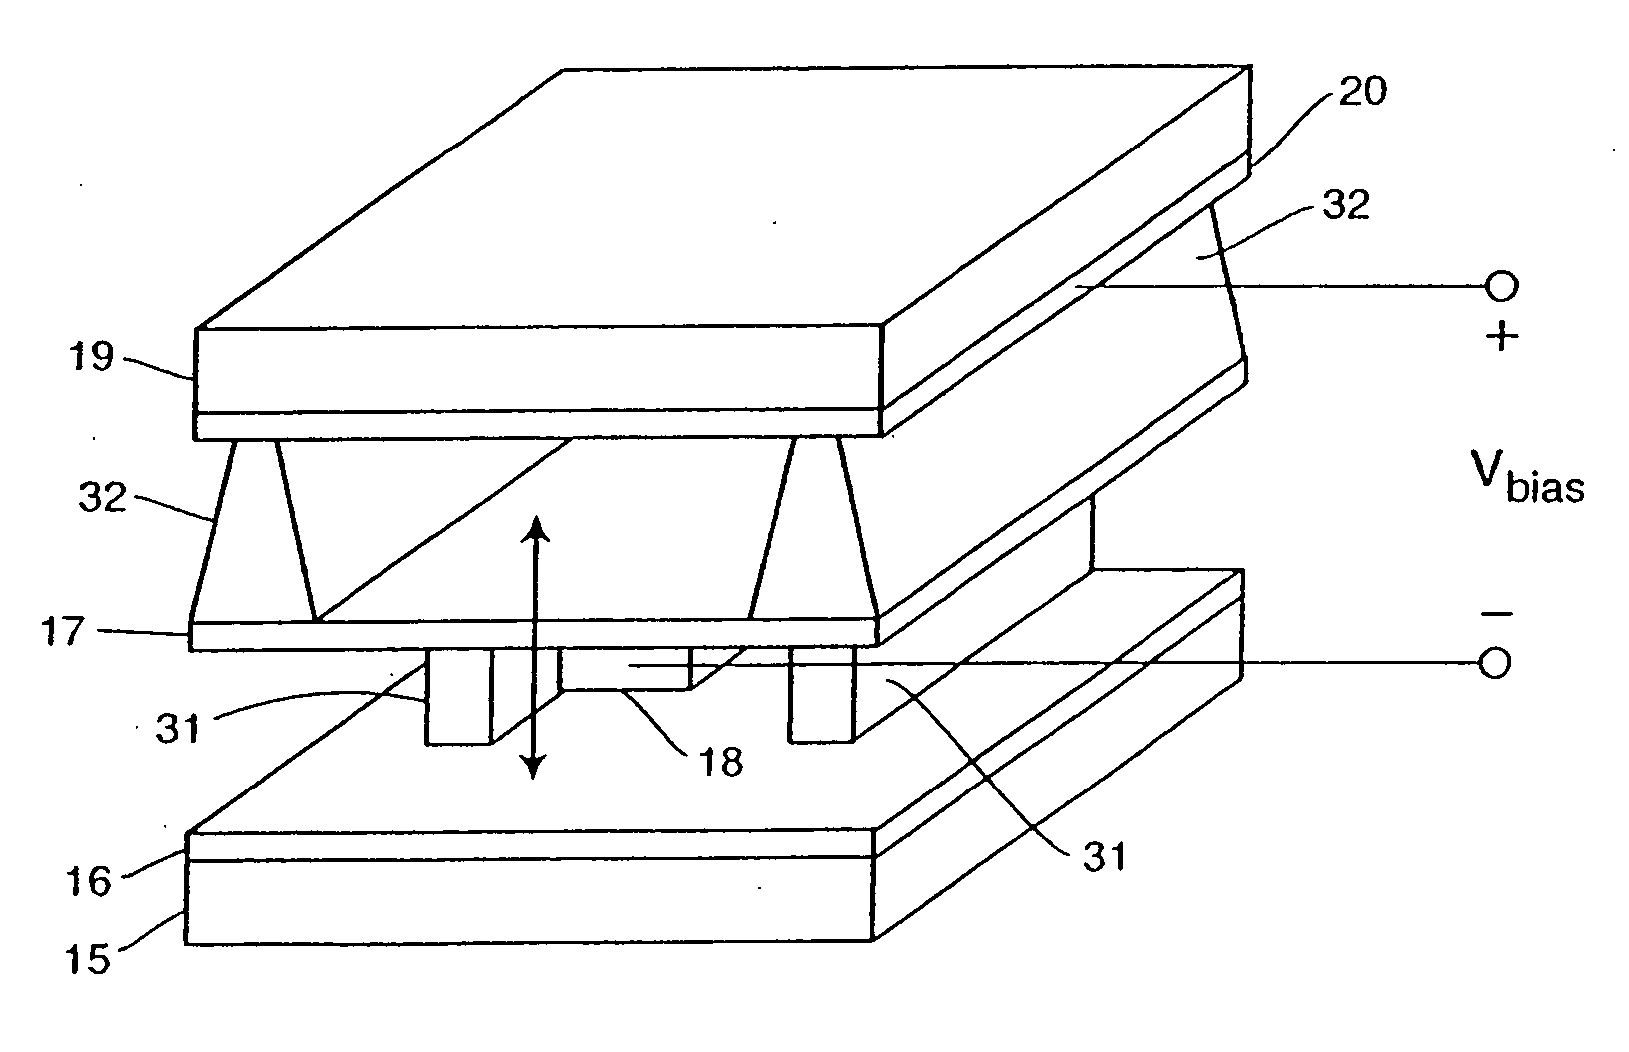 Variable capacitance membrane actuator for wide band tuning of microstrip resonators and filters